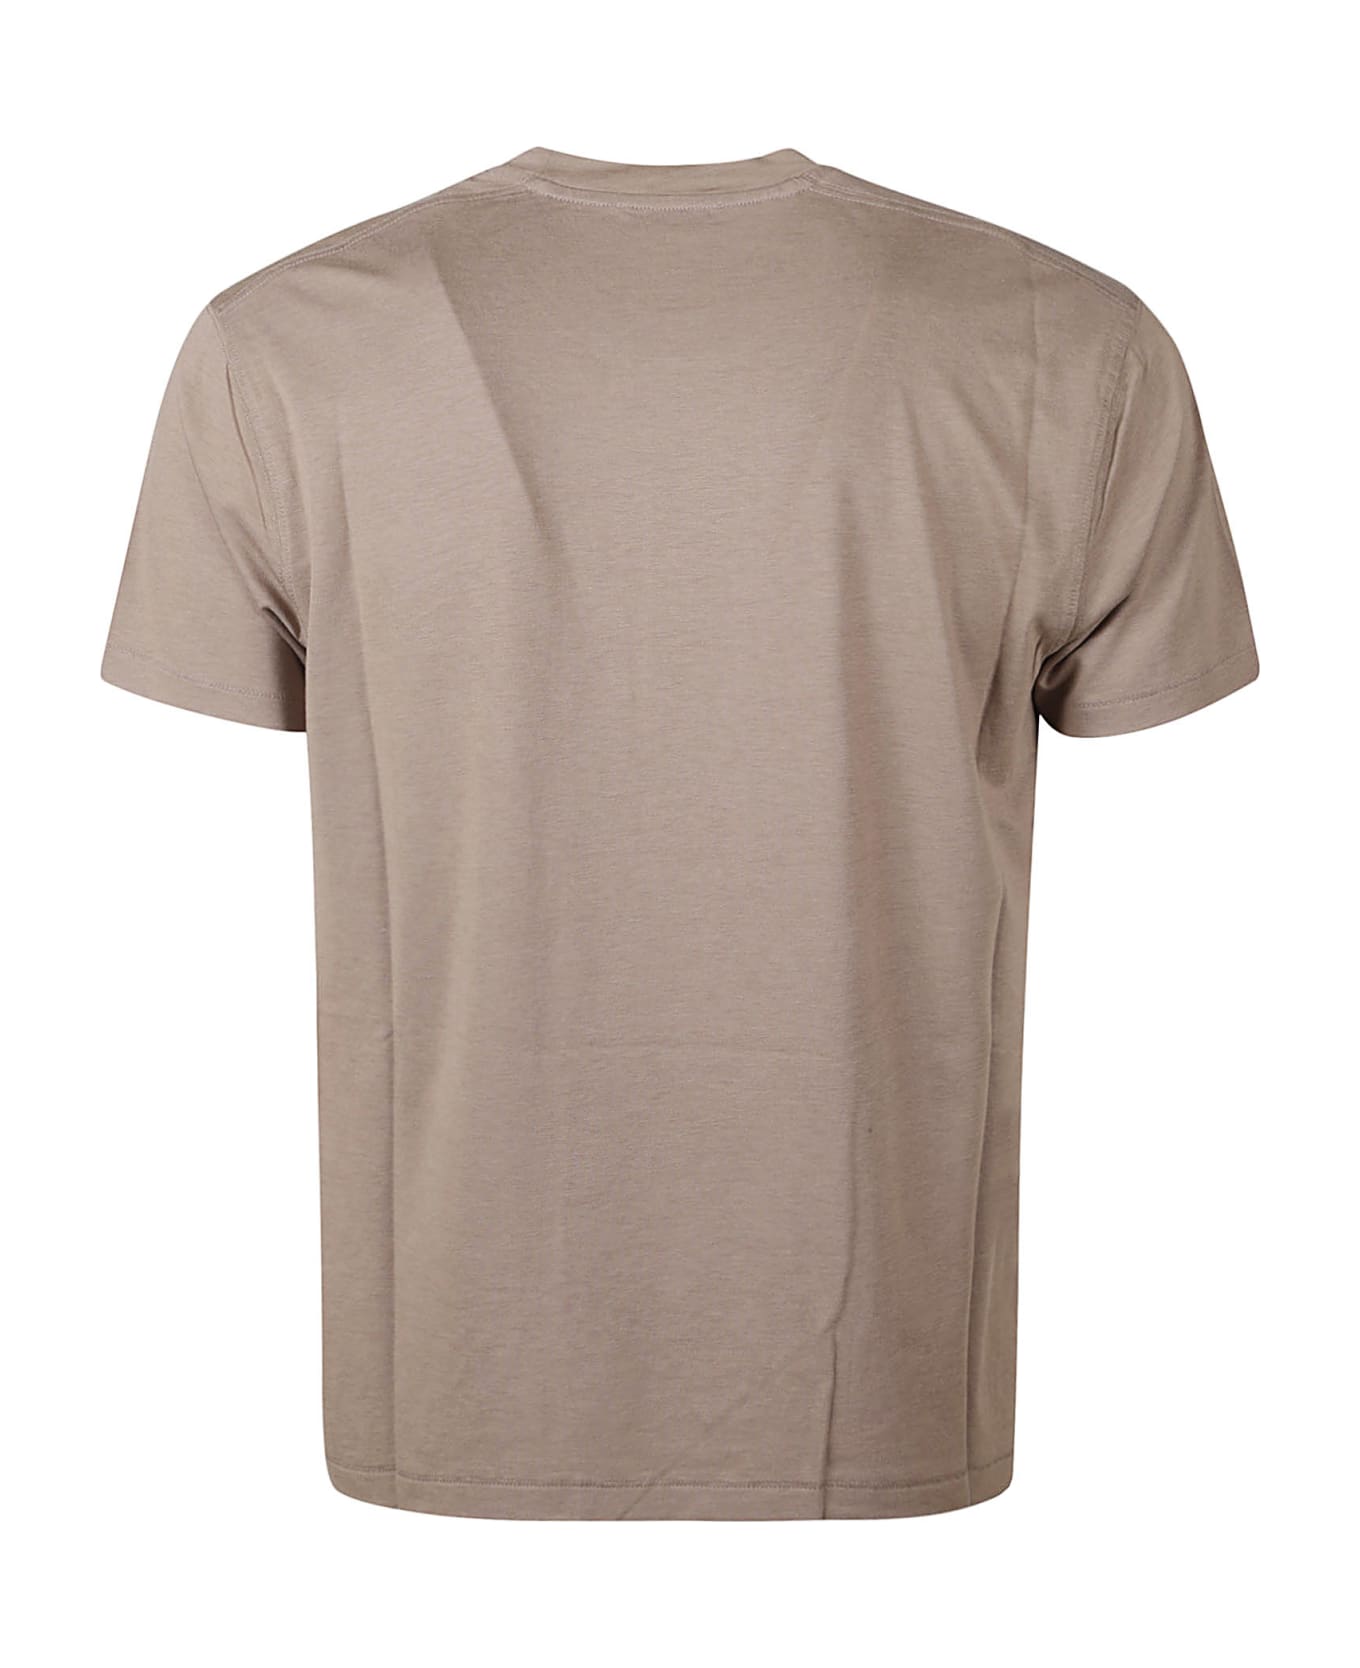 Tom Ford Round Neck T-shirt - Green